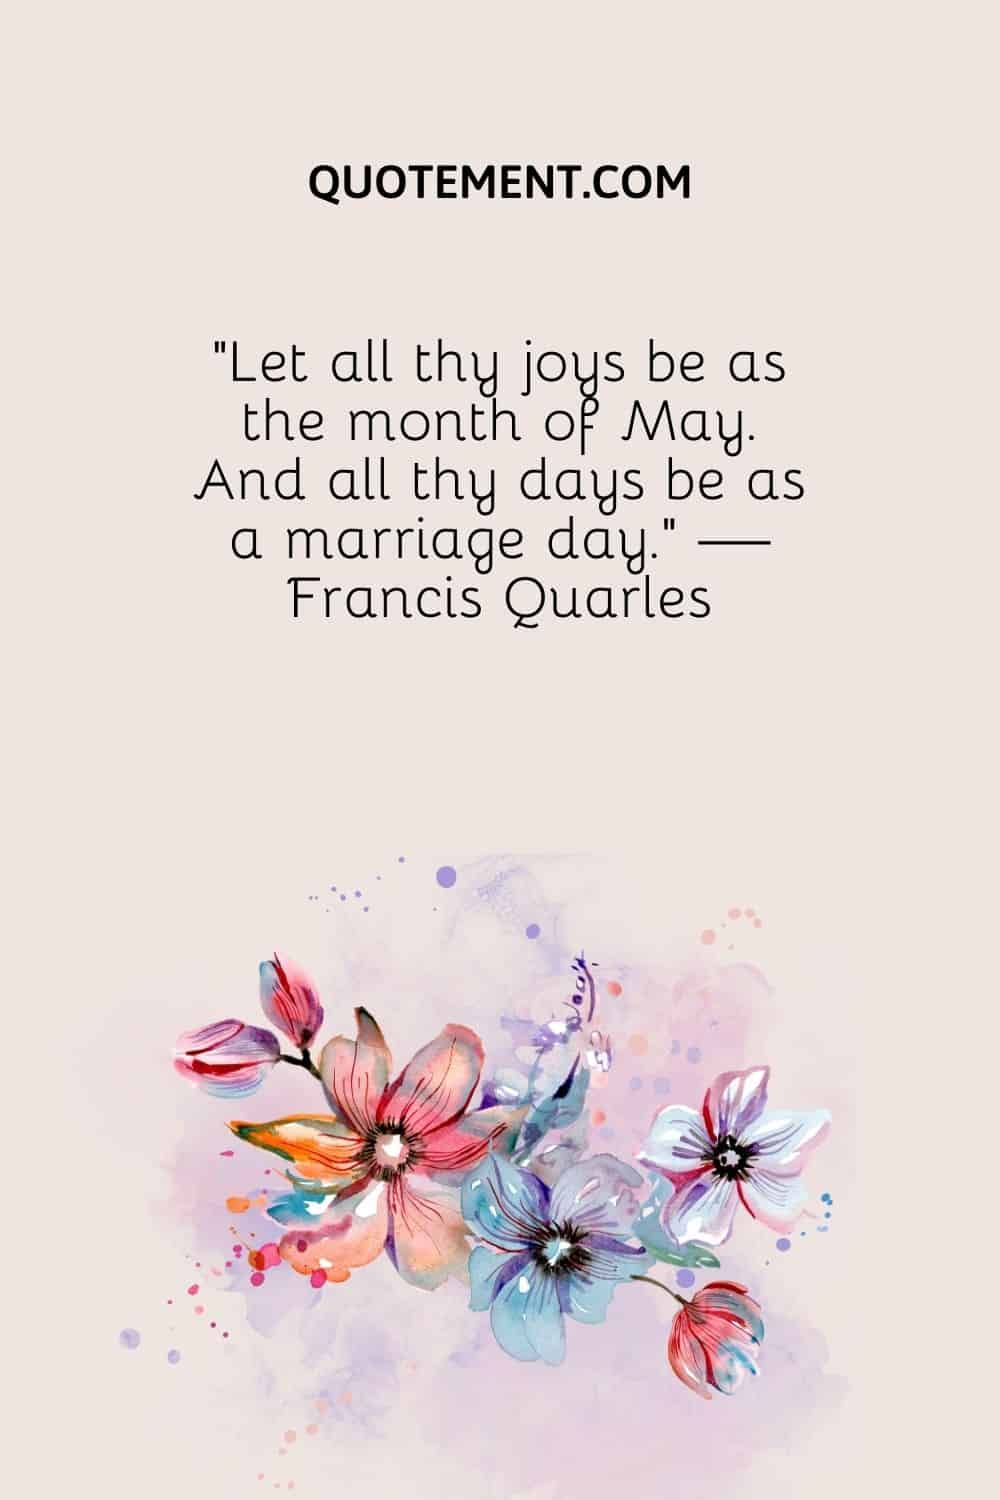 “Let all thy joys be as the month of May. And all thy days be as a marriage day.” — Francis Quarles